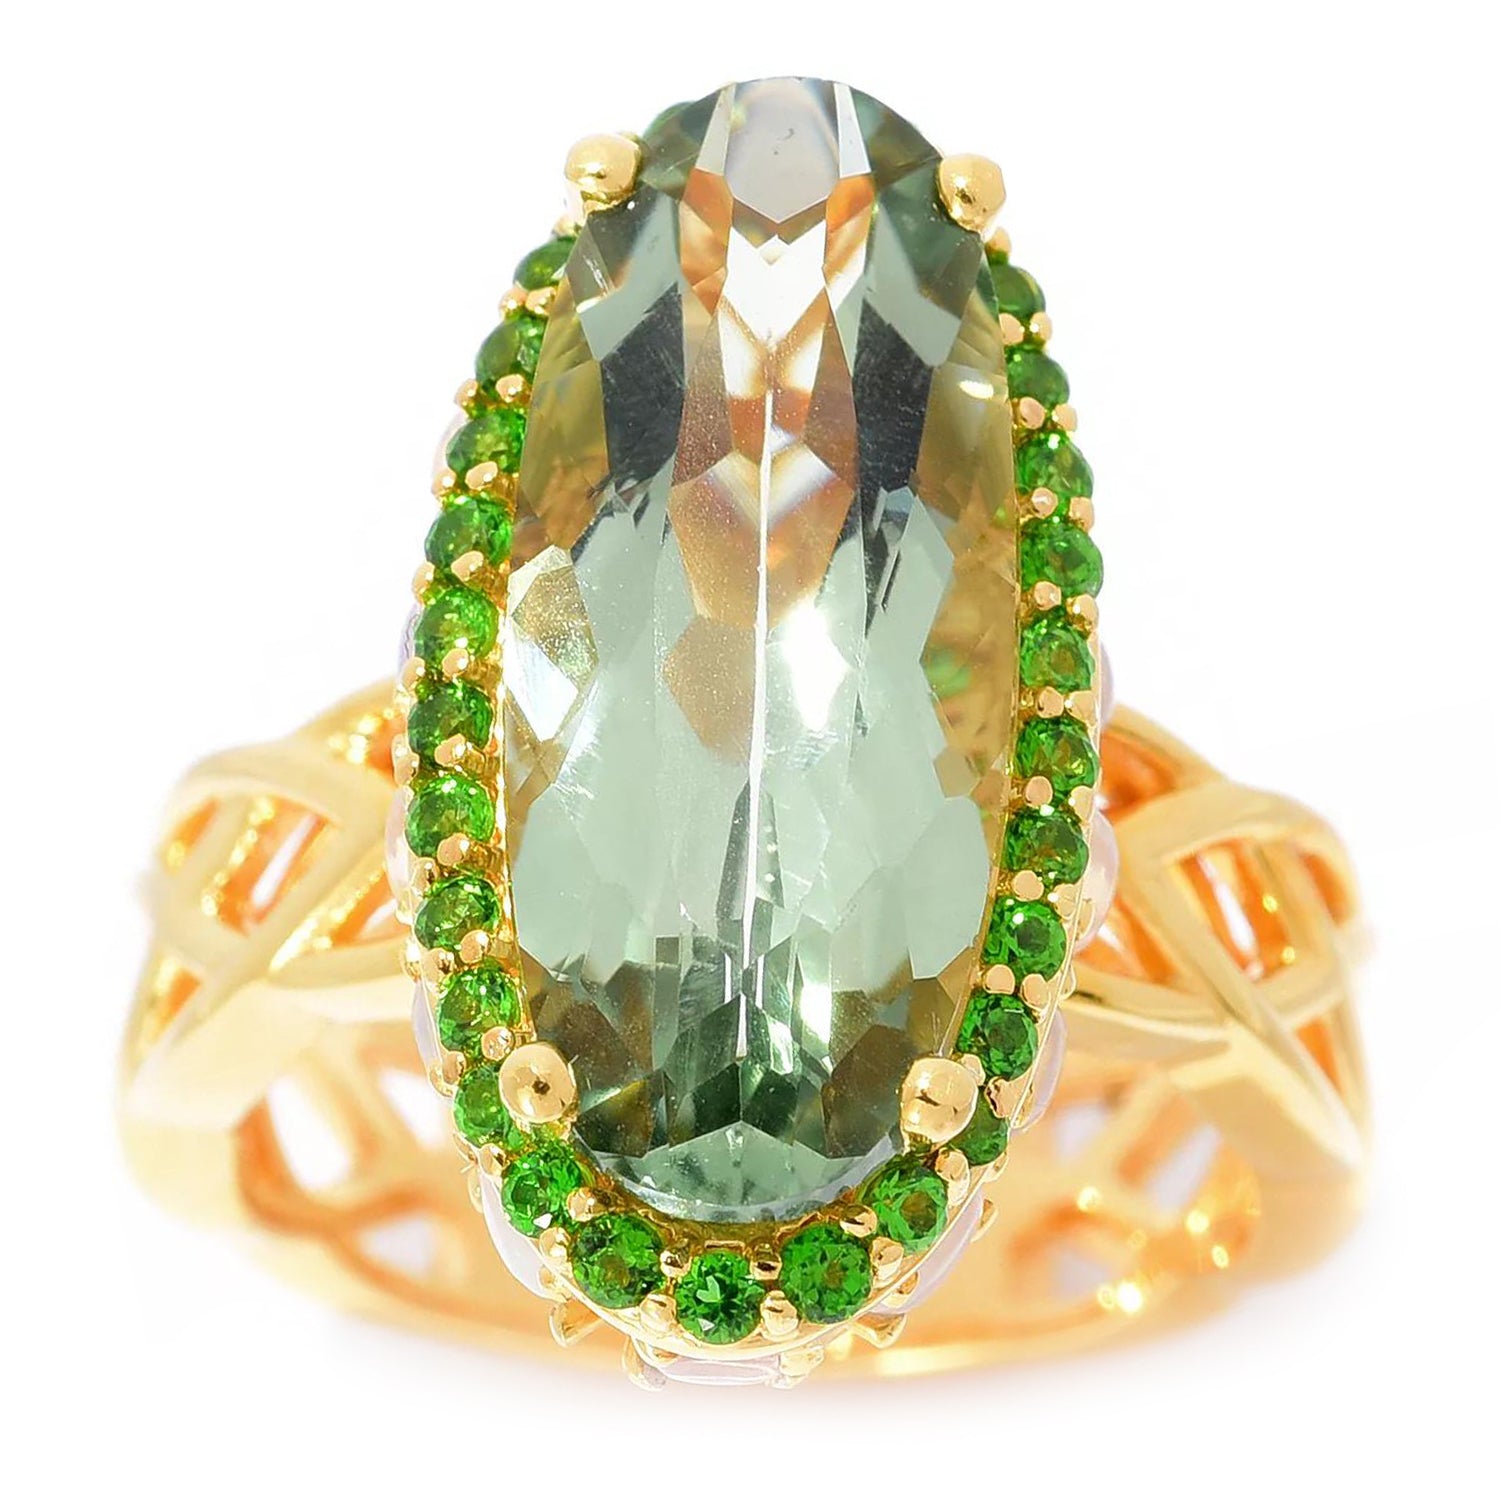 Hall of Jewels 8.81ctw Prasiolite, Chrome Diopside & Ethiopian Opal Woven Shank Ring